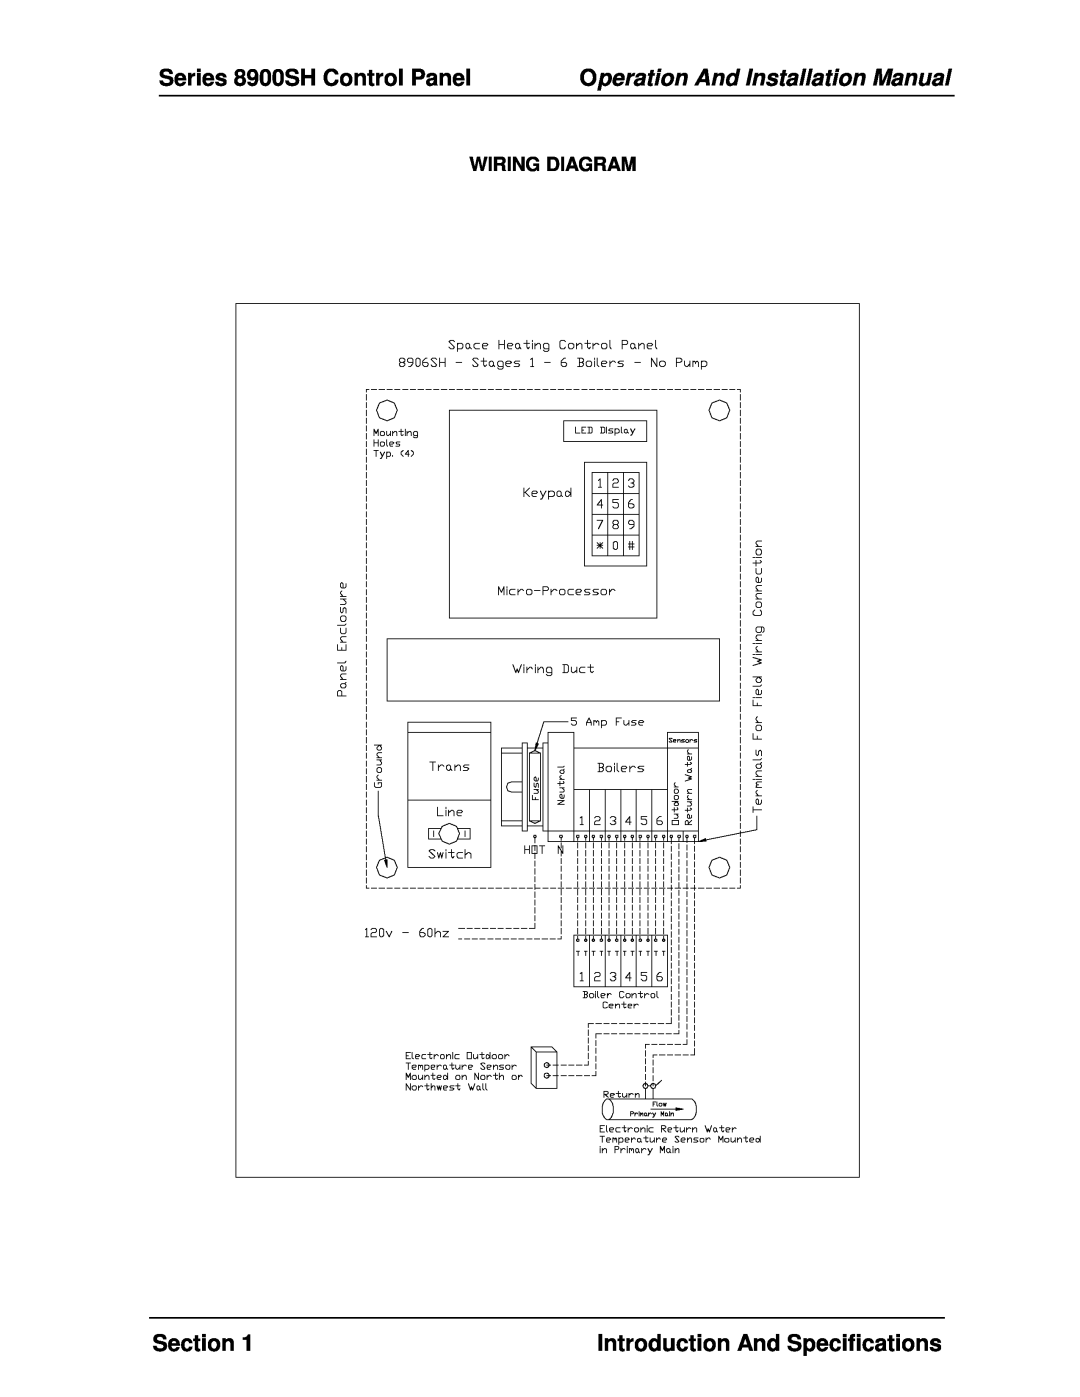 Panasonic 8900 SH Series 8900SH Control Panel, Operation And Installation Manual, Section, Introduction And Specifications 